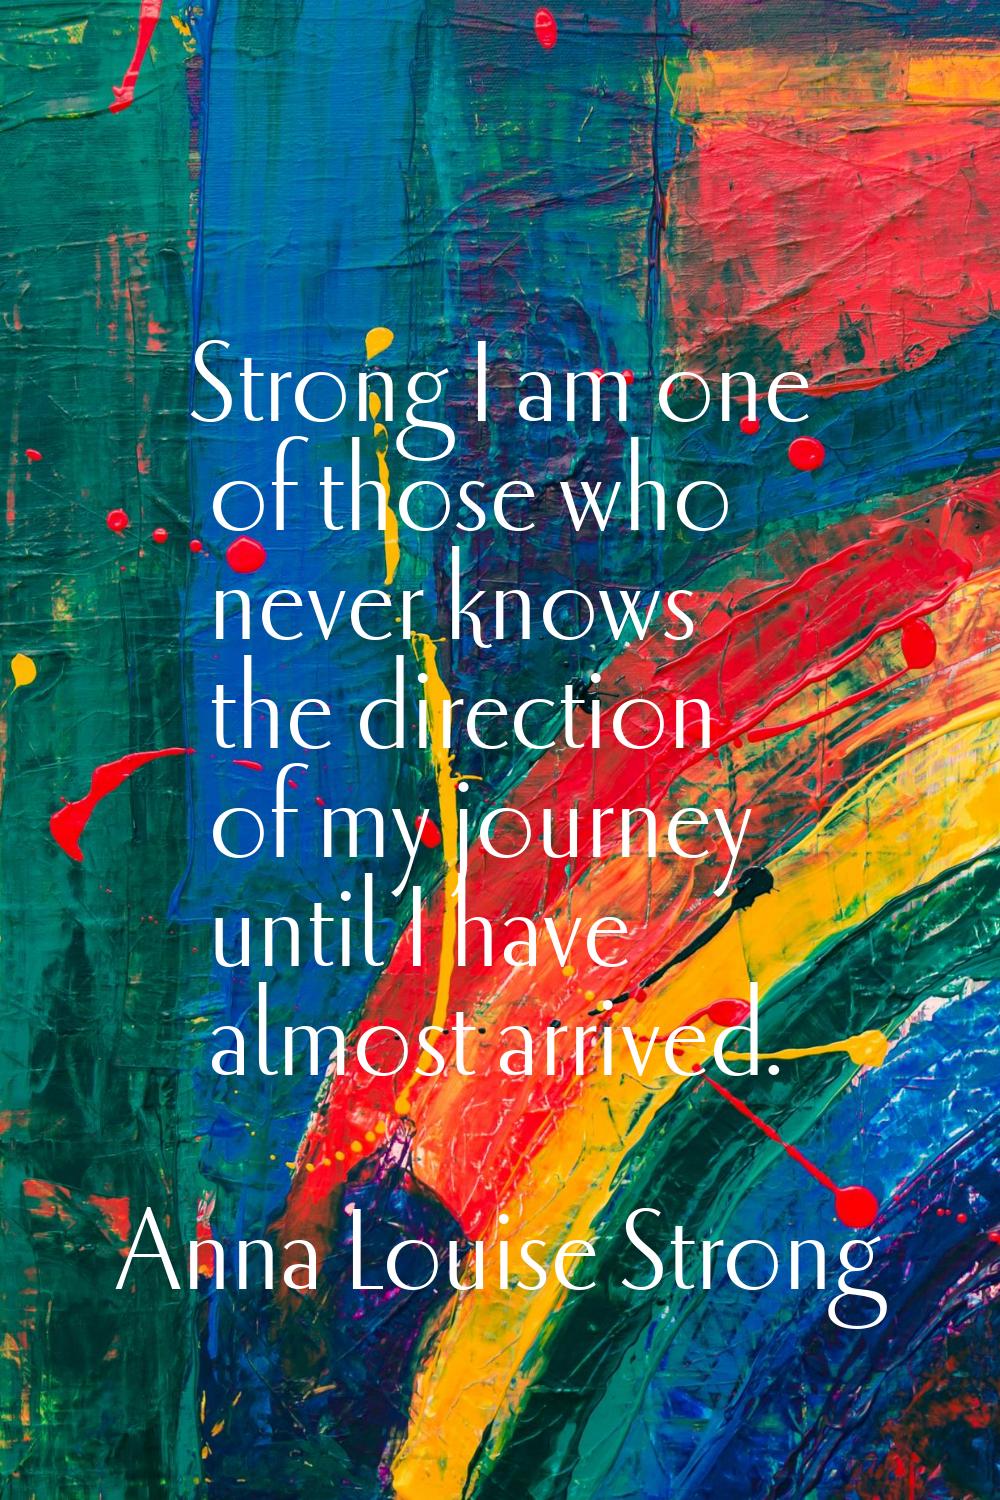 Strong I am one of those who never knows the direction of my journey until I have almost arrived.